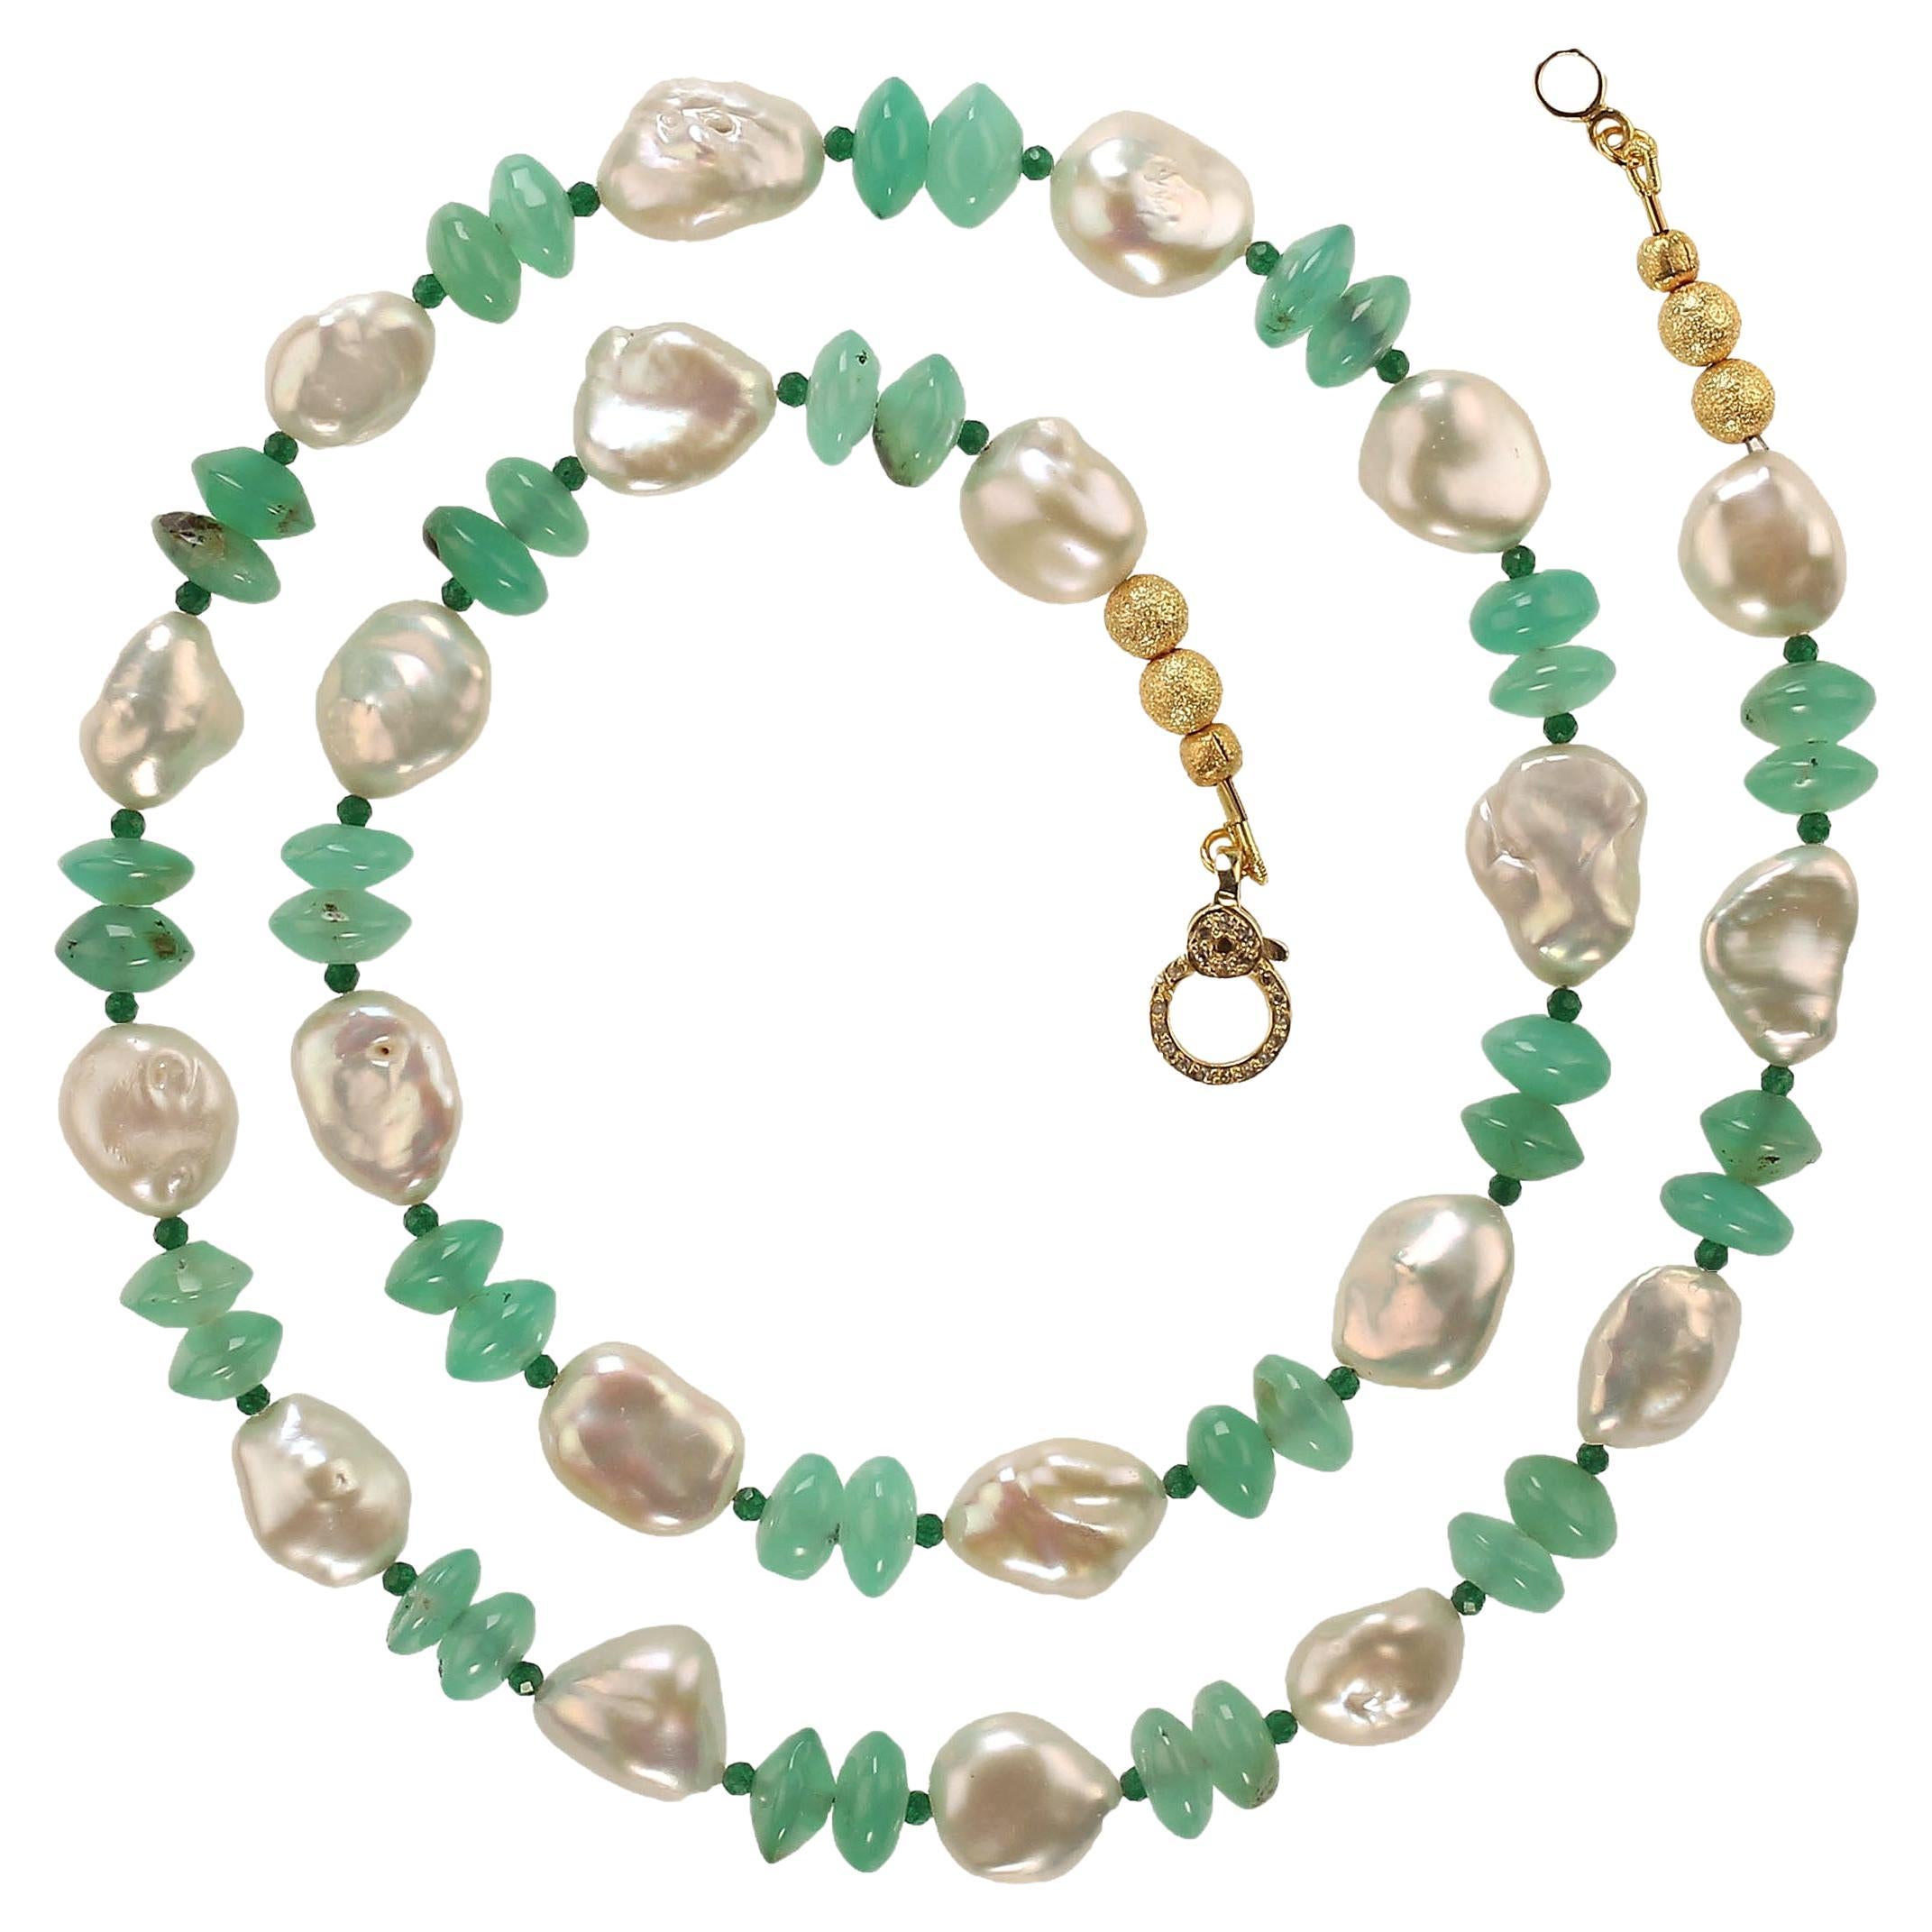 Artisan AJD 24 Inch Glowing Green Chrysoprase & White Pearl Necklace  Perfect Gift For Sale